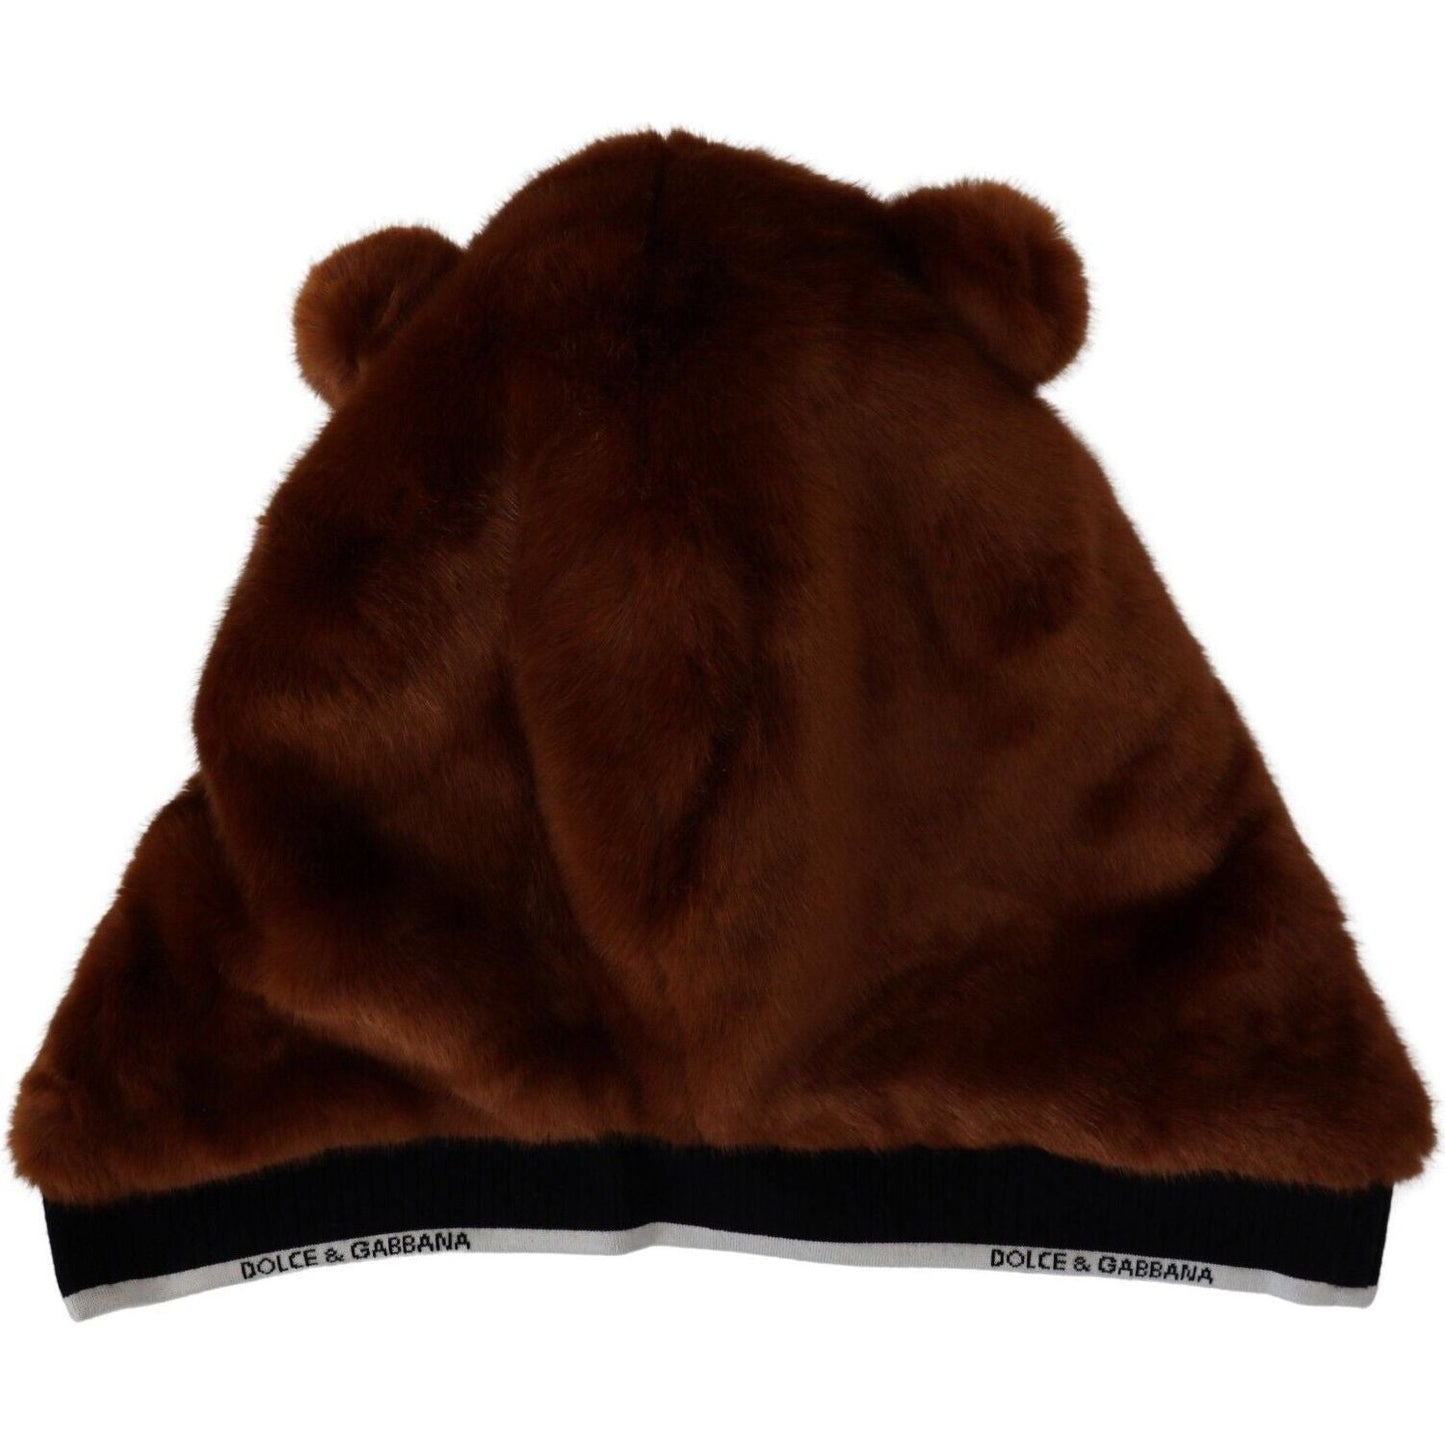 Dolce & Gabbana Elegant Whole Head Hat in Refined Brown Hue brown-bear-fur-whole-head-cap-one-size-polyester-hat